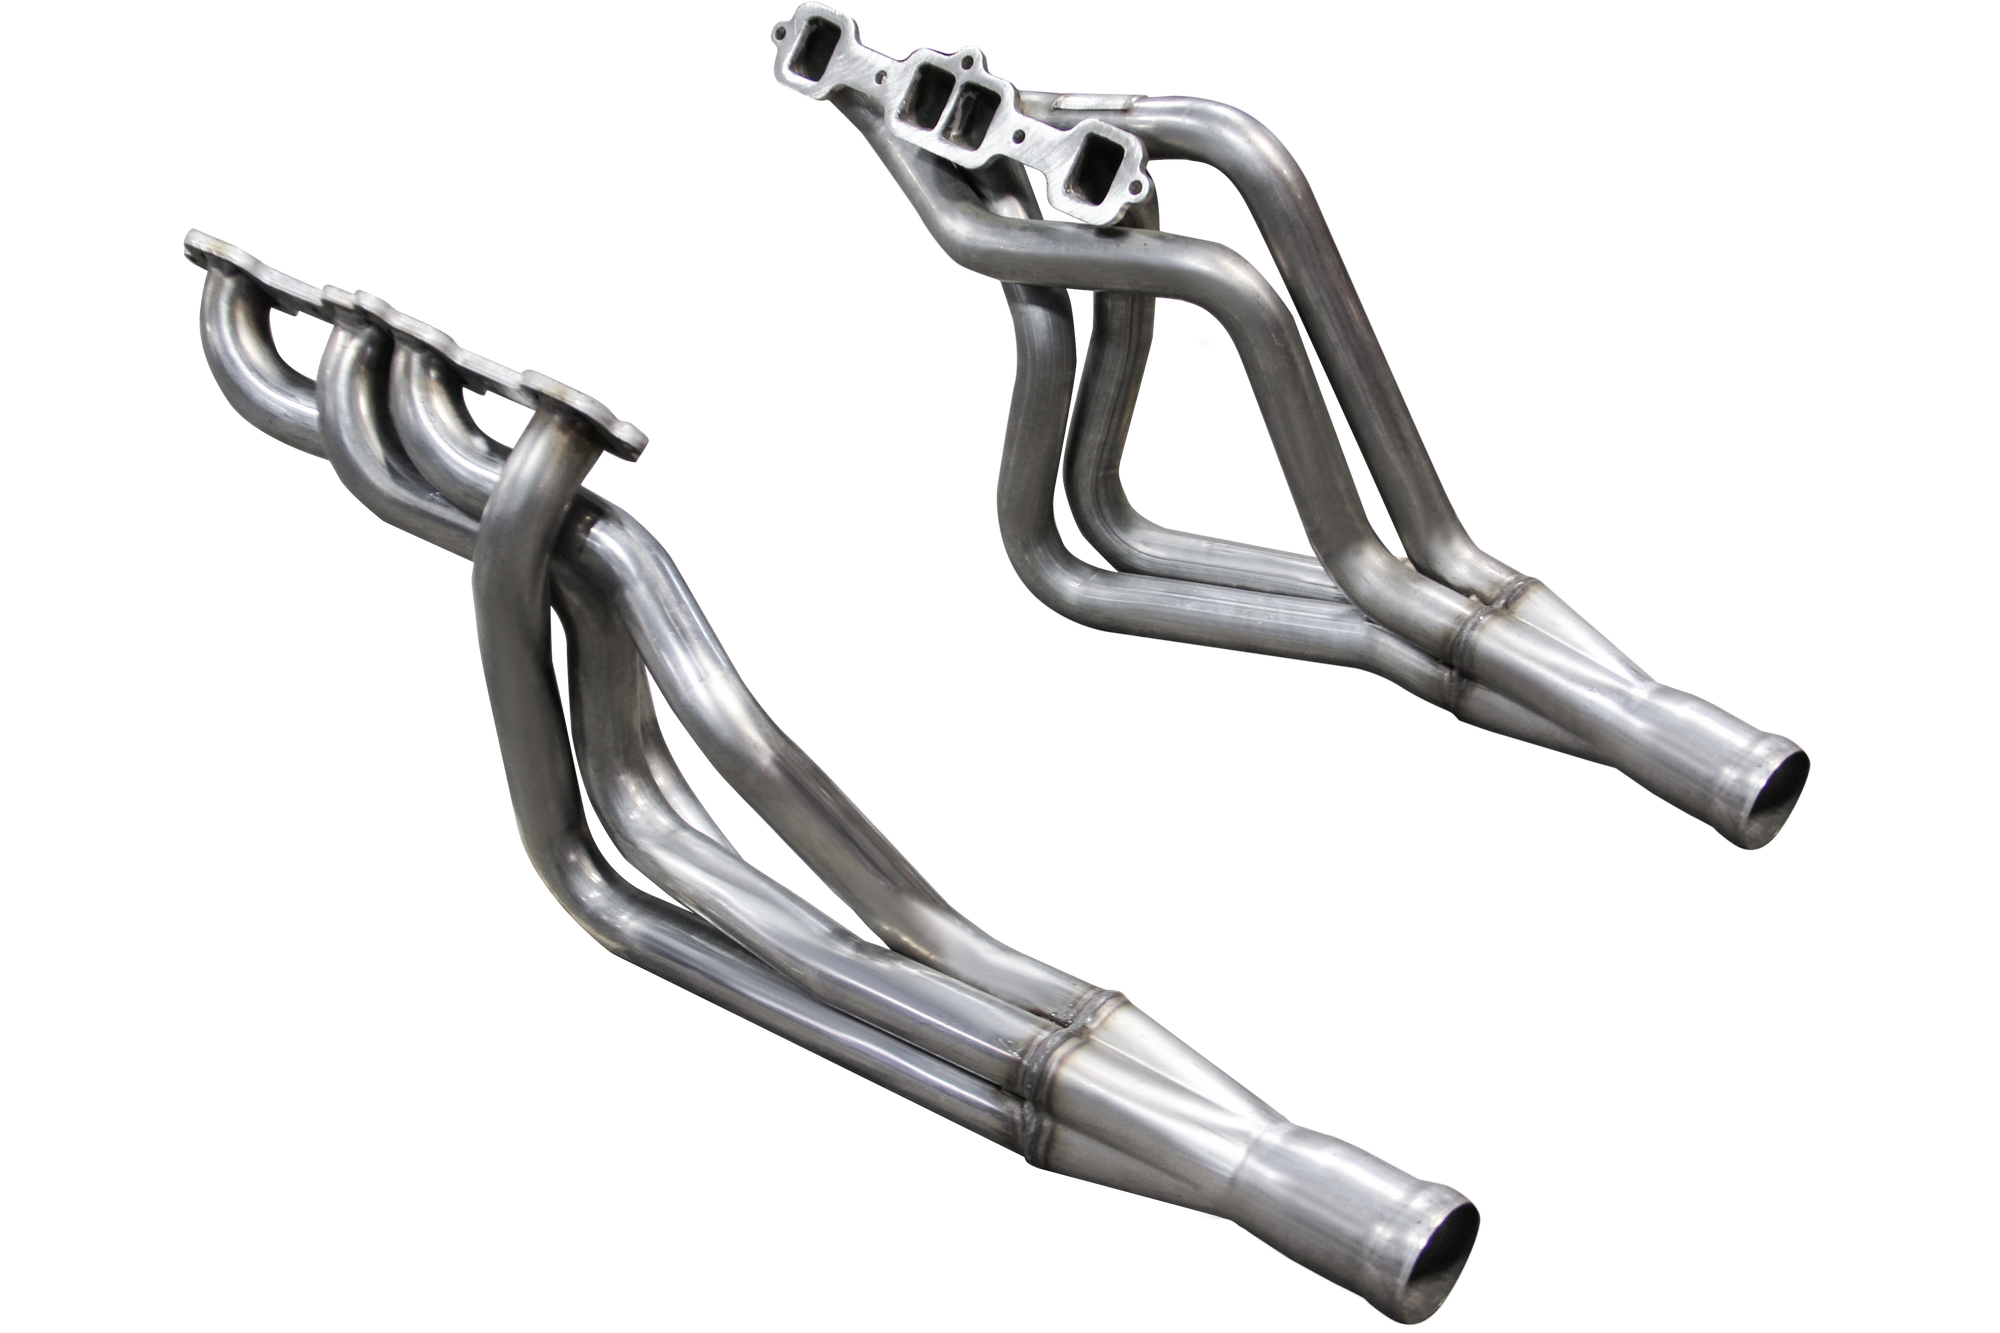 Trans Am (78-79) Headers With The 403 Small Block